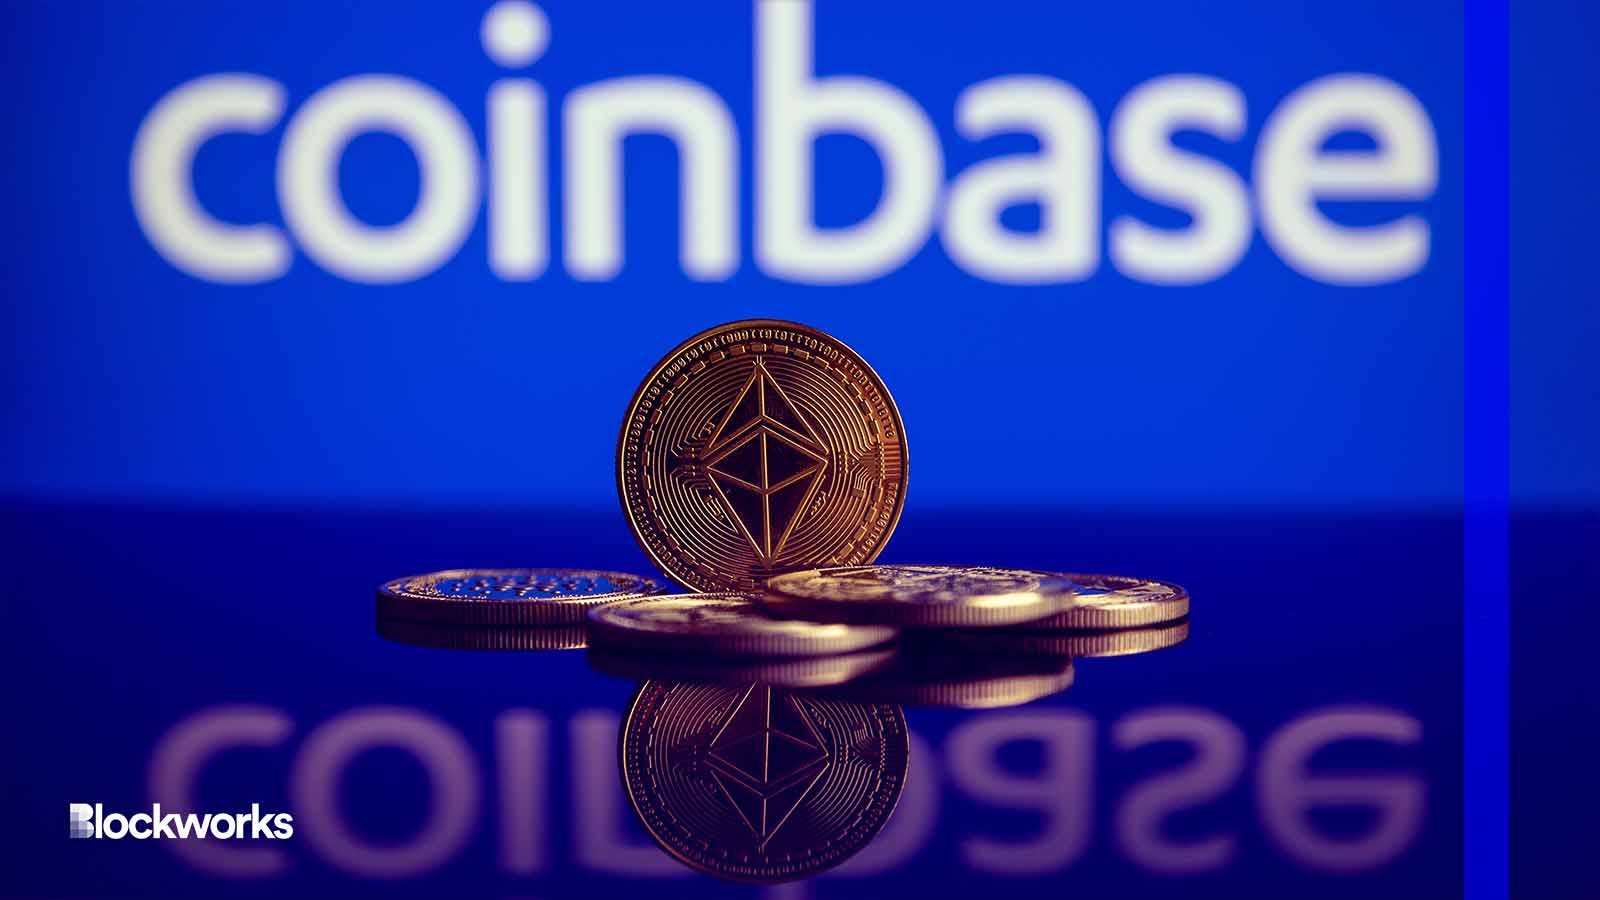 Coinbase - Buy and Sell Bitcoin, Ethereum, and more with trust